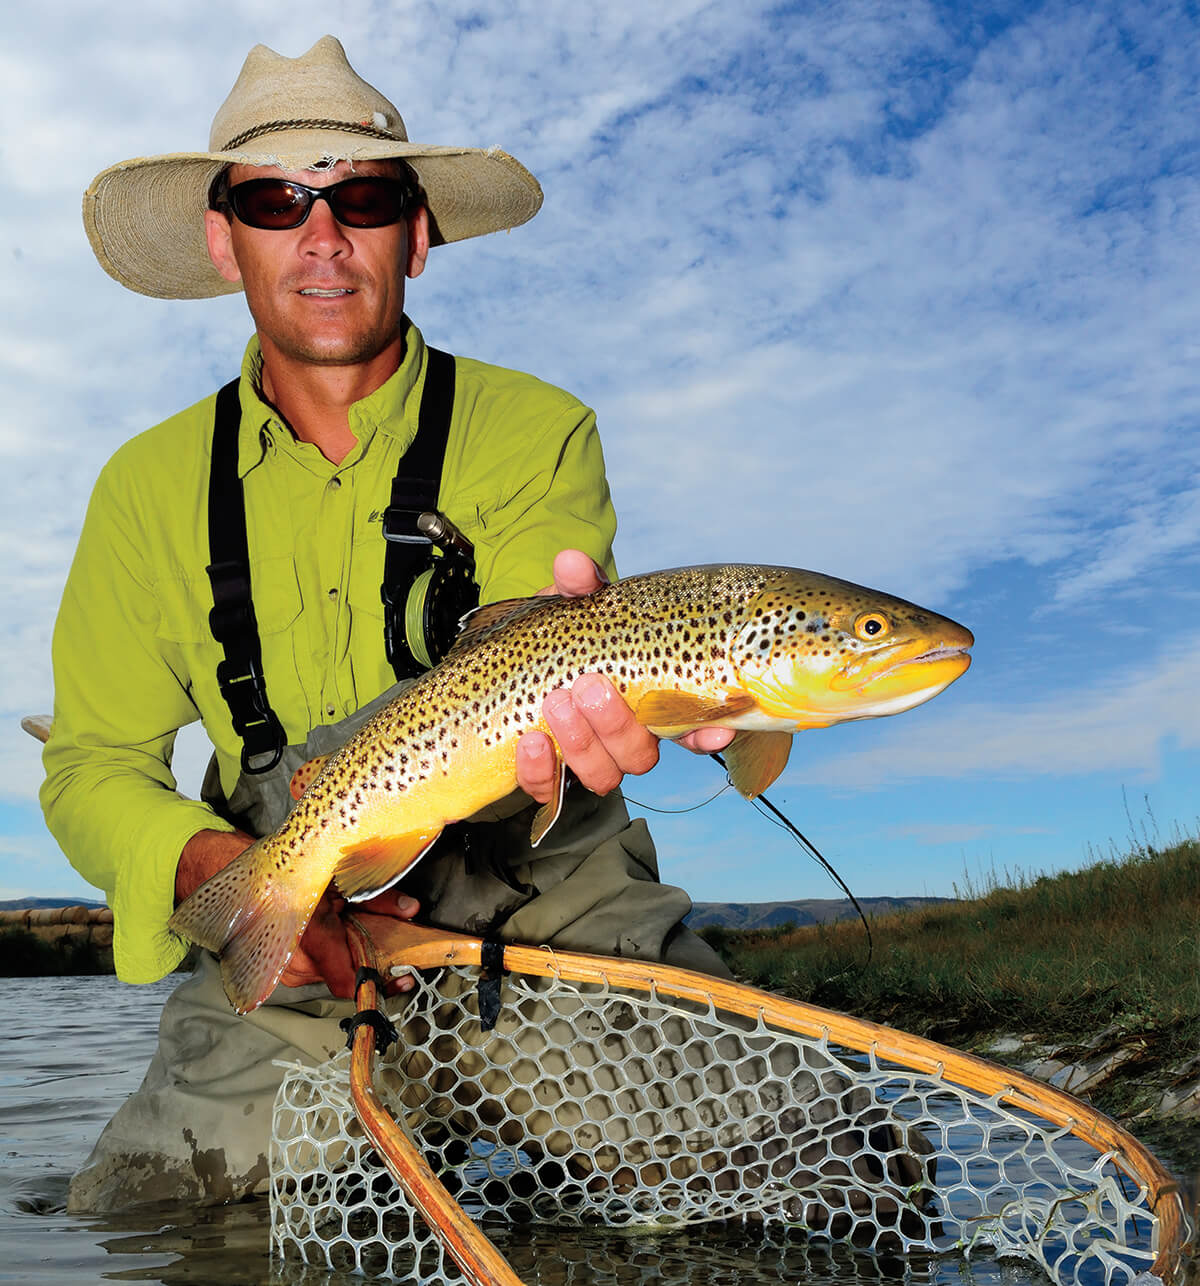 Back to the Bighorn River - Fly Fisherman